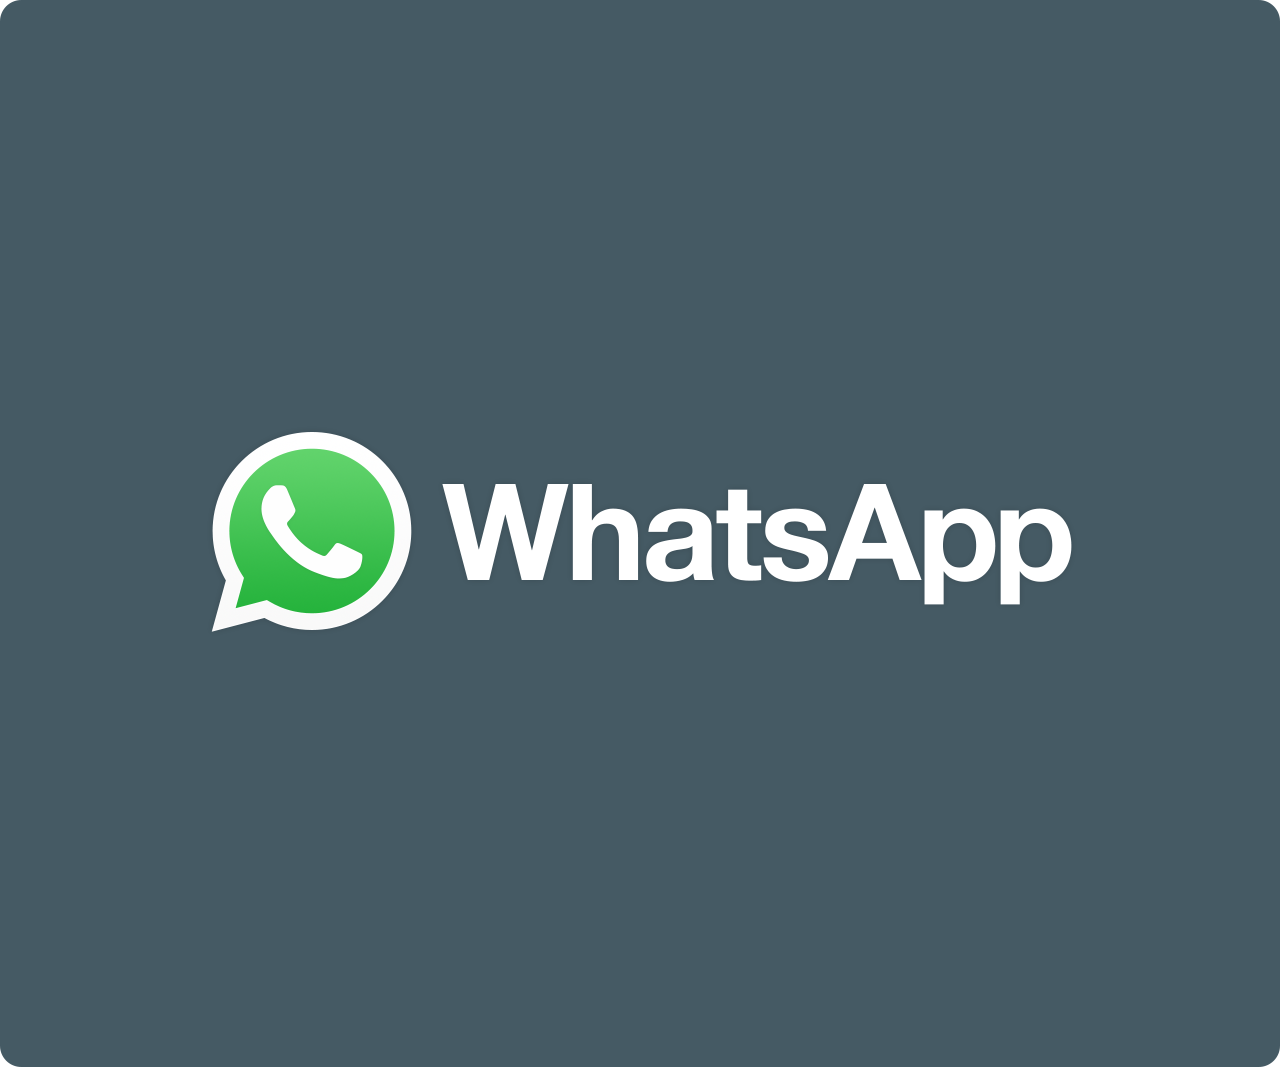 How to enable Dark Mode on WhatsApp?